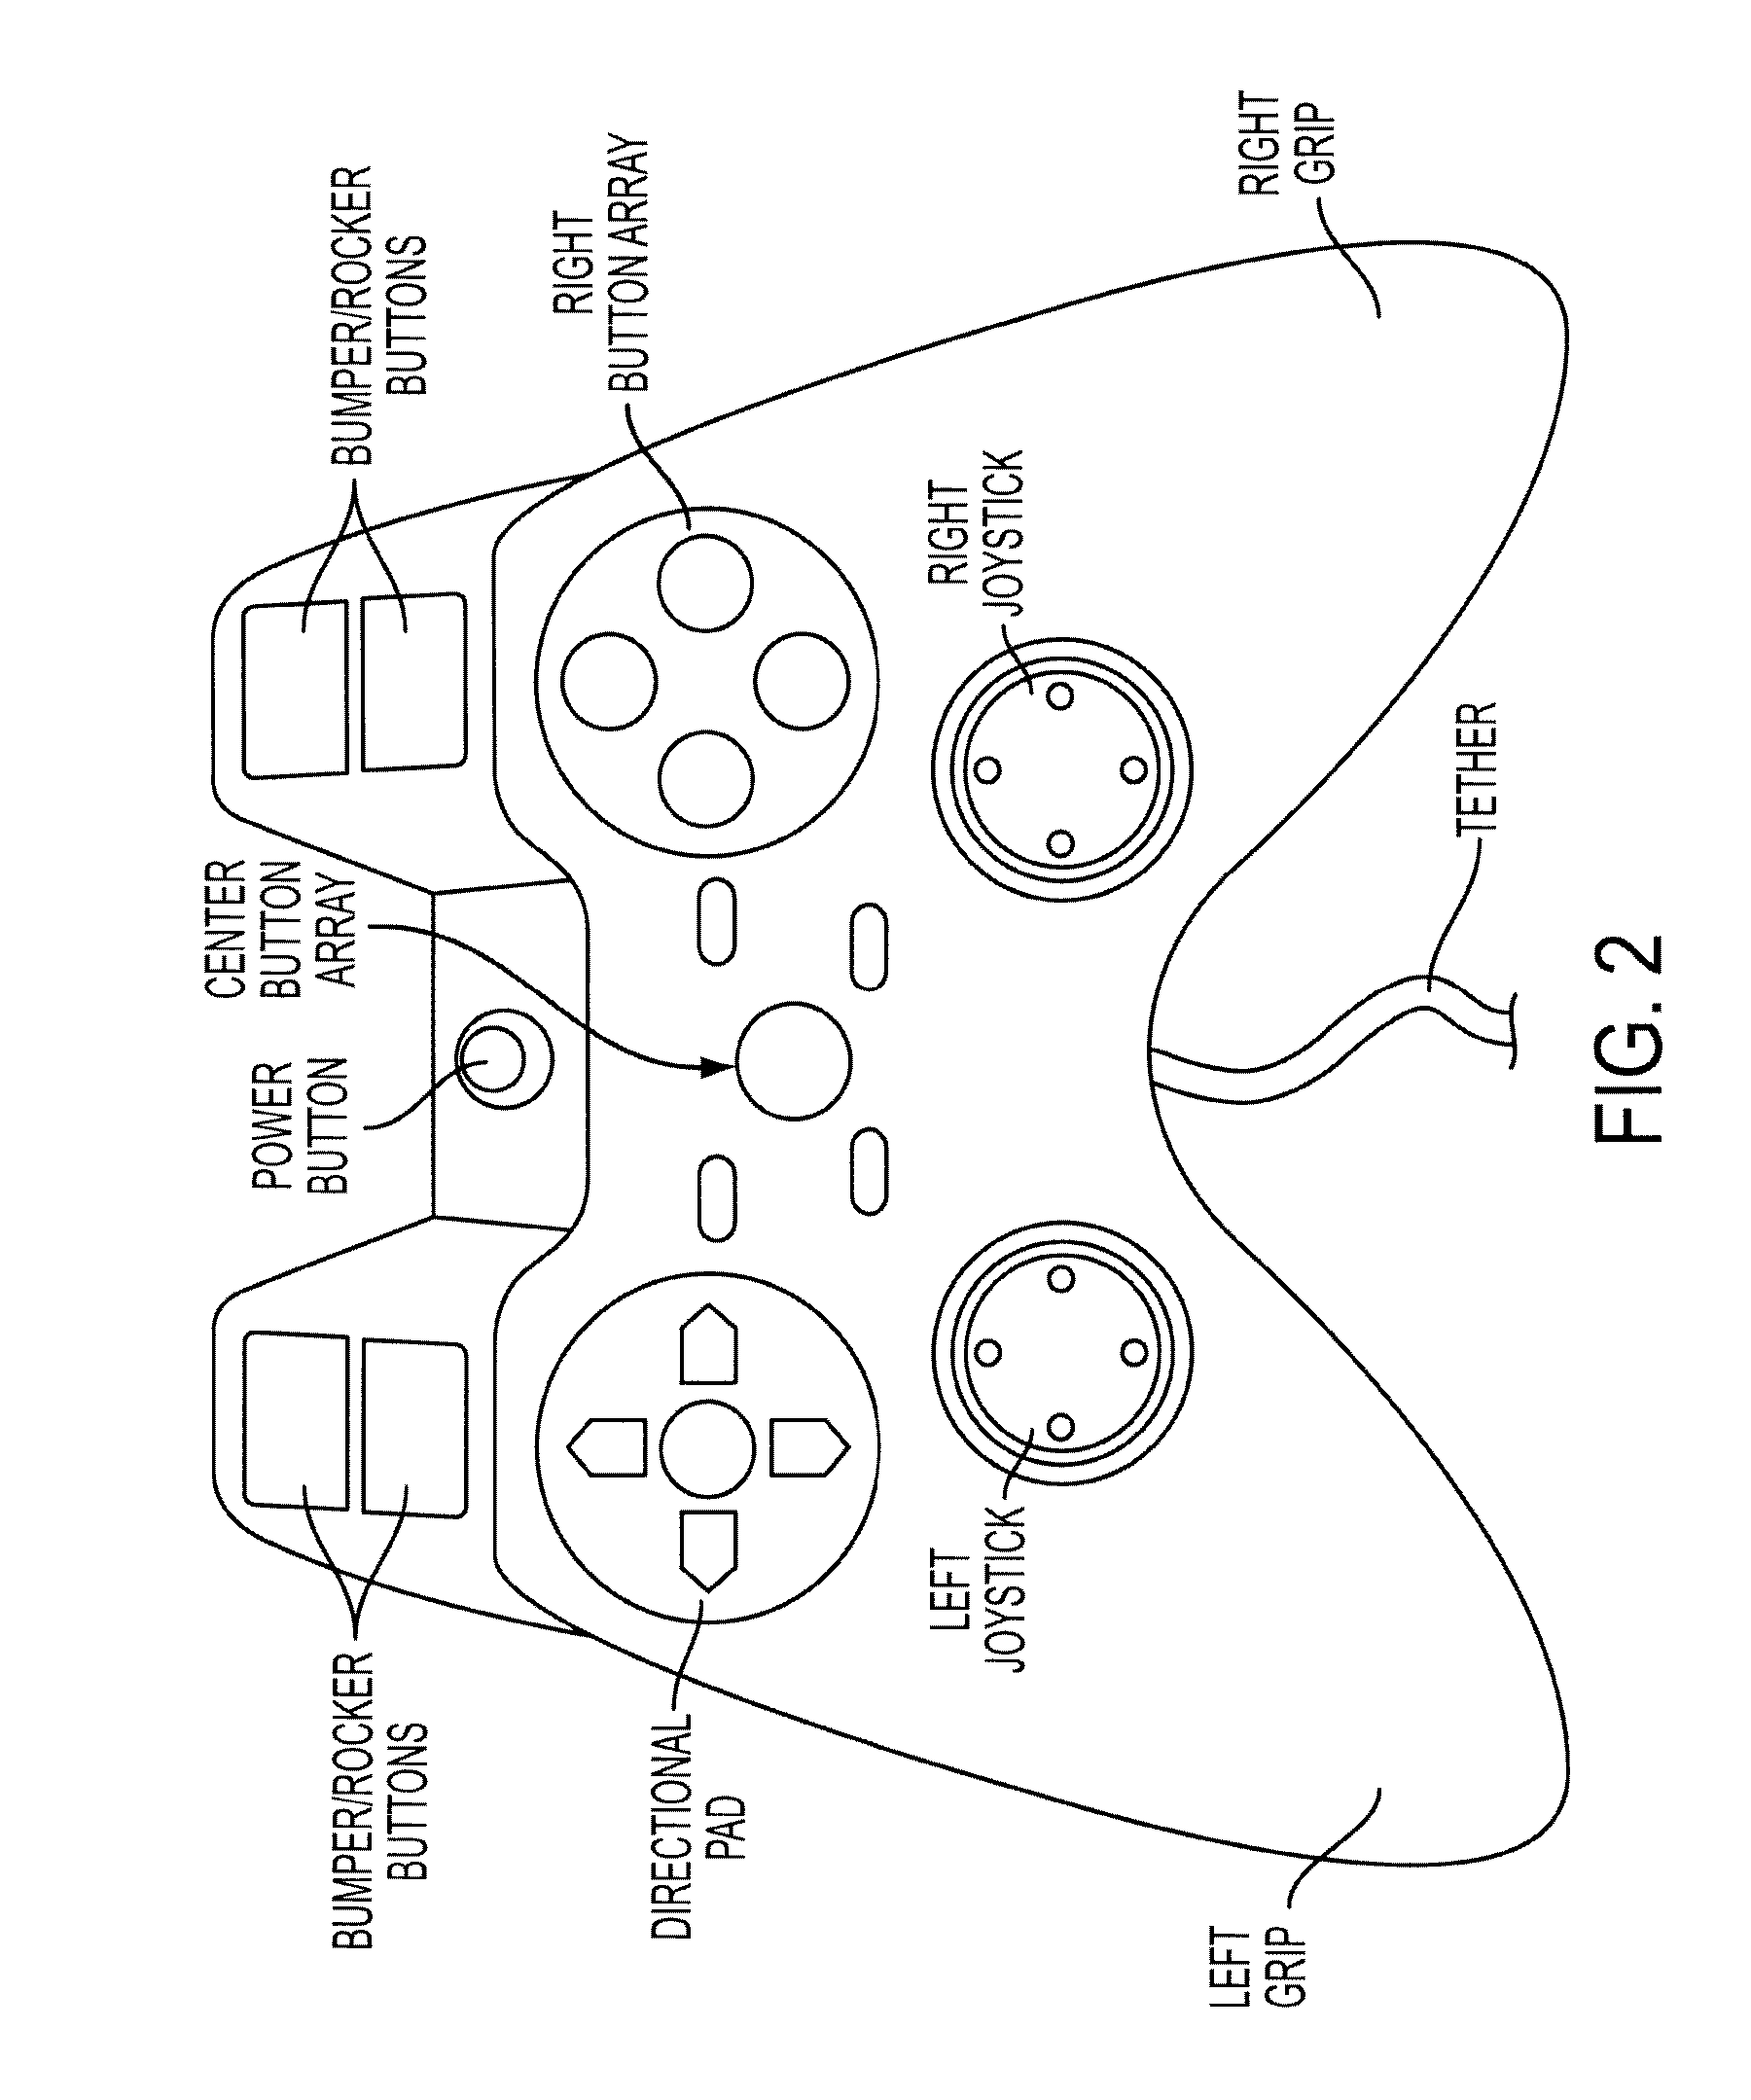 Control System for a Remote Vehicle